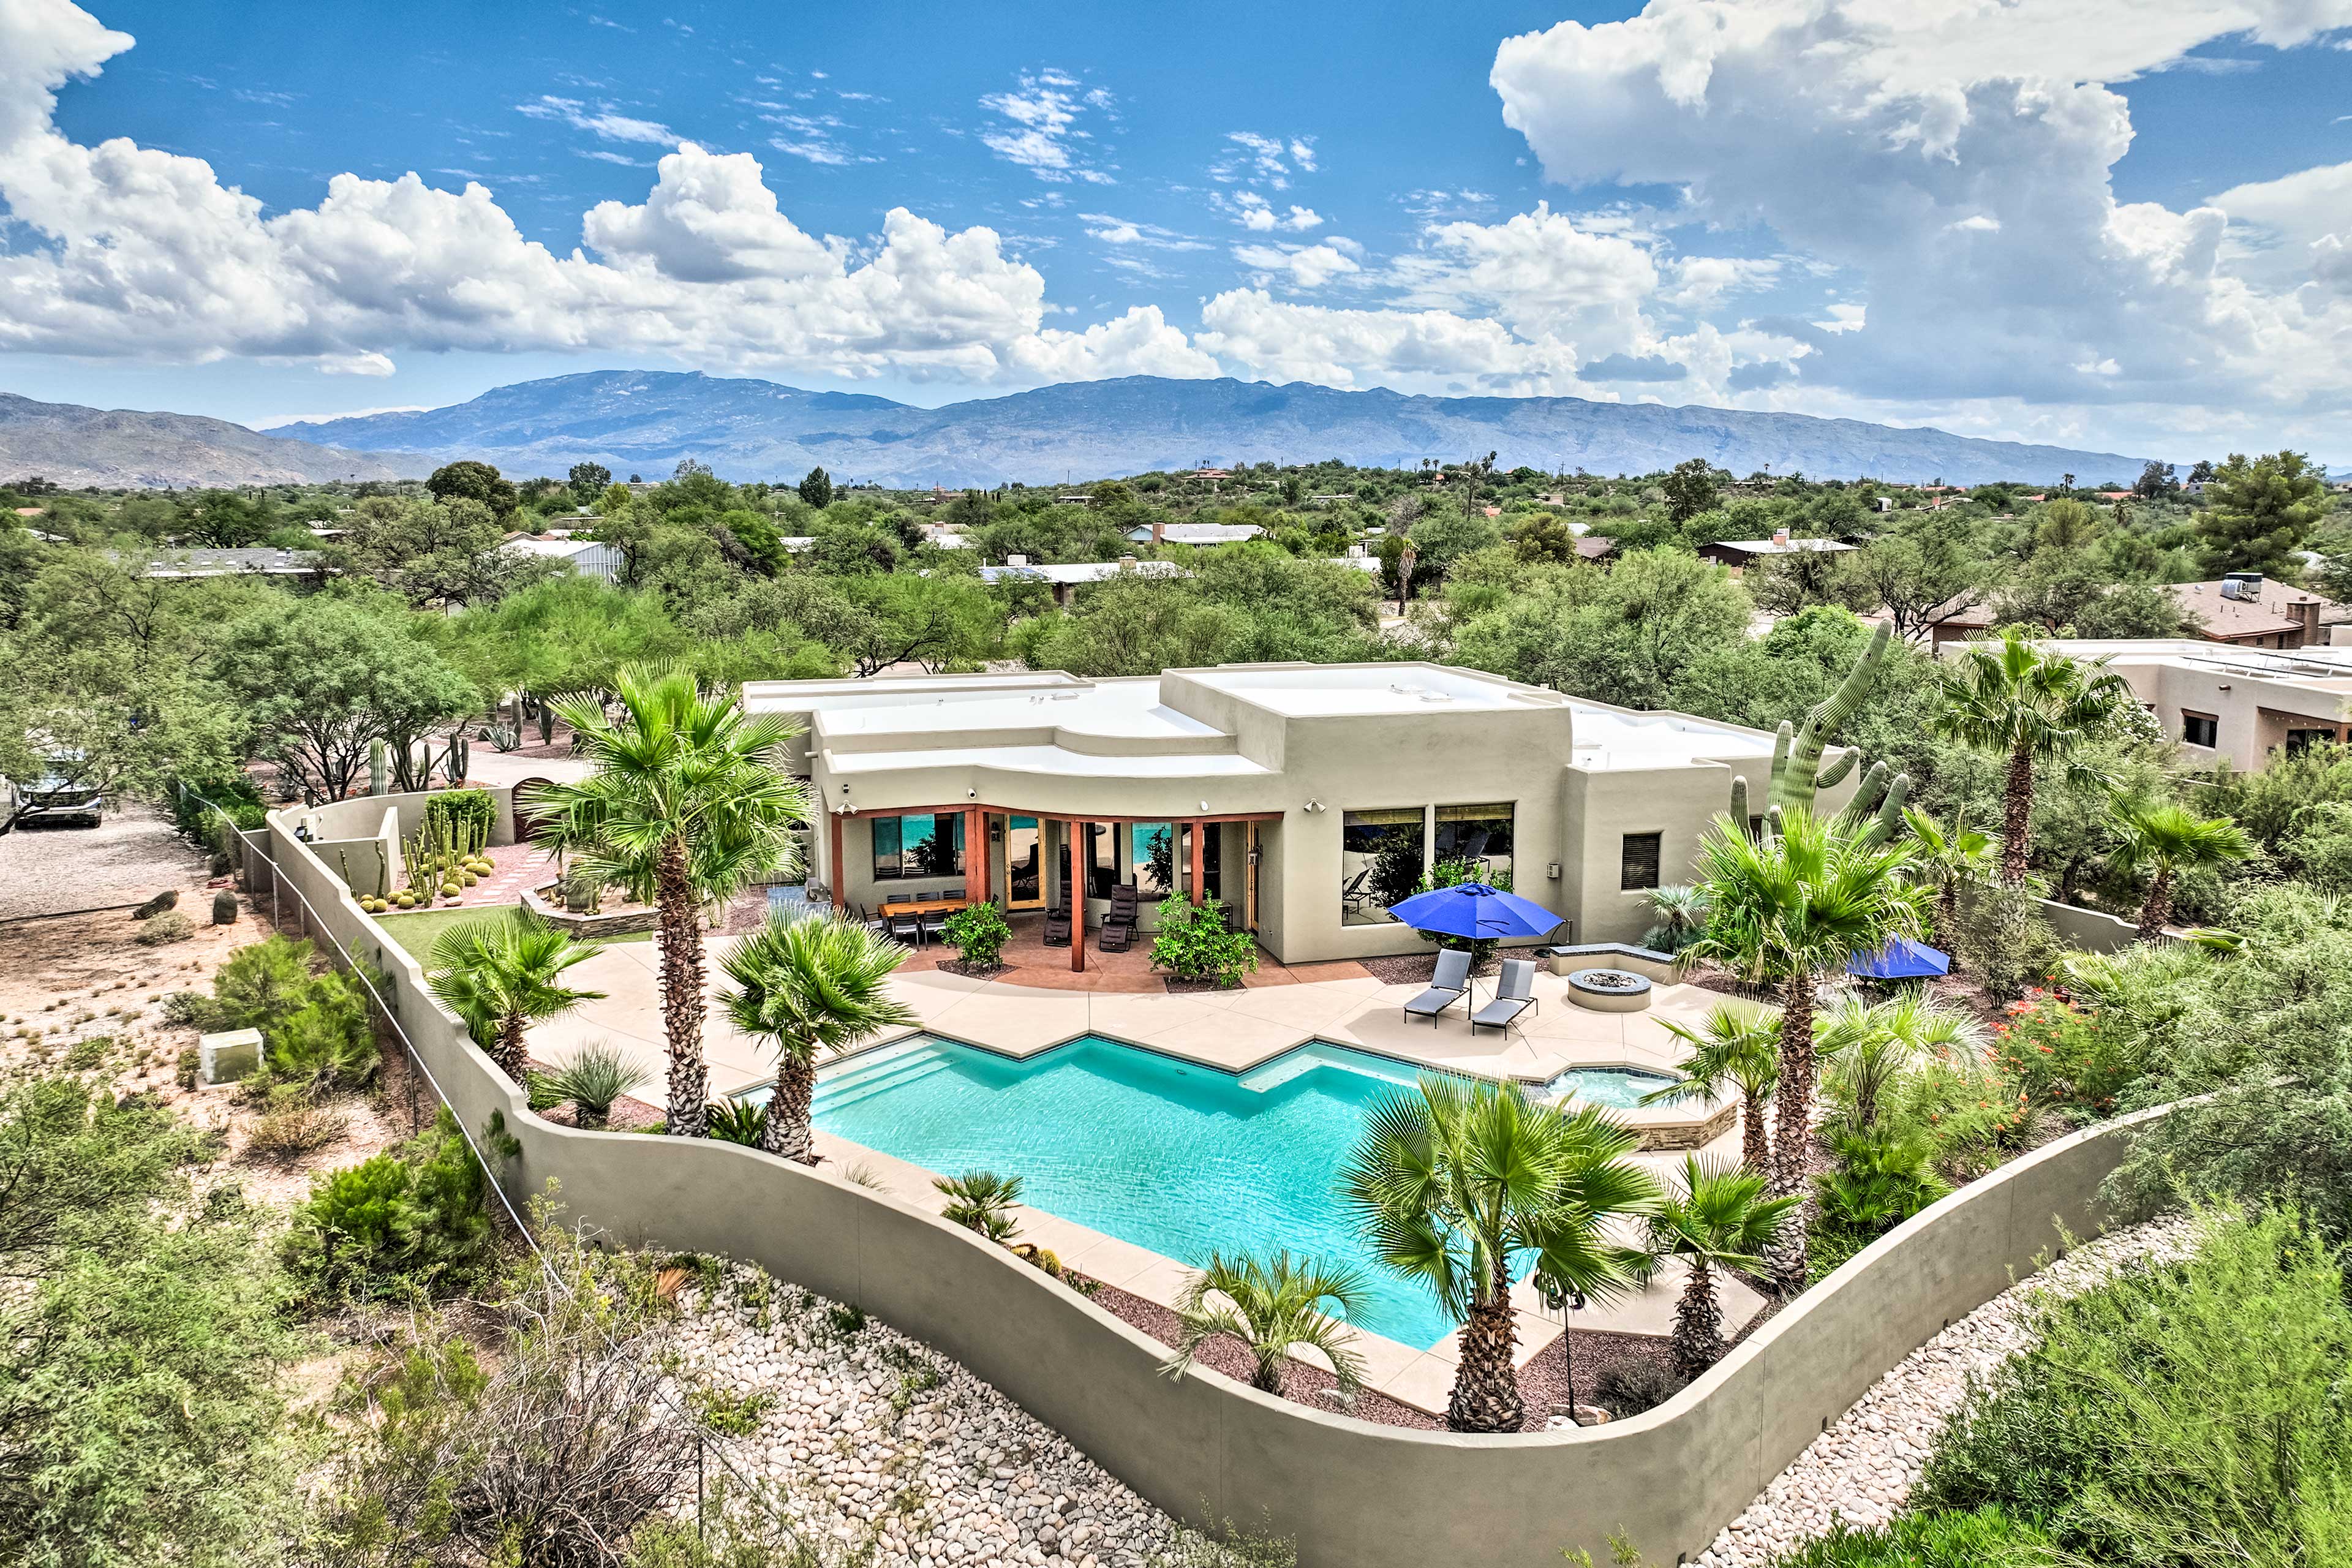 Tucson Vacation Rental | 4BR | 3.5BA | 3,188 Sq Ft | Step-Free Access